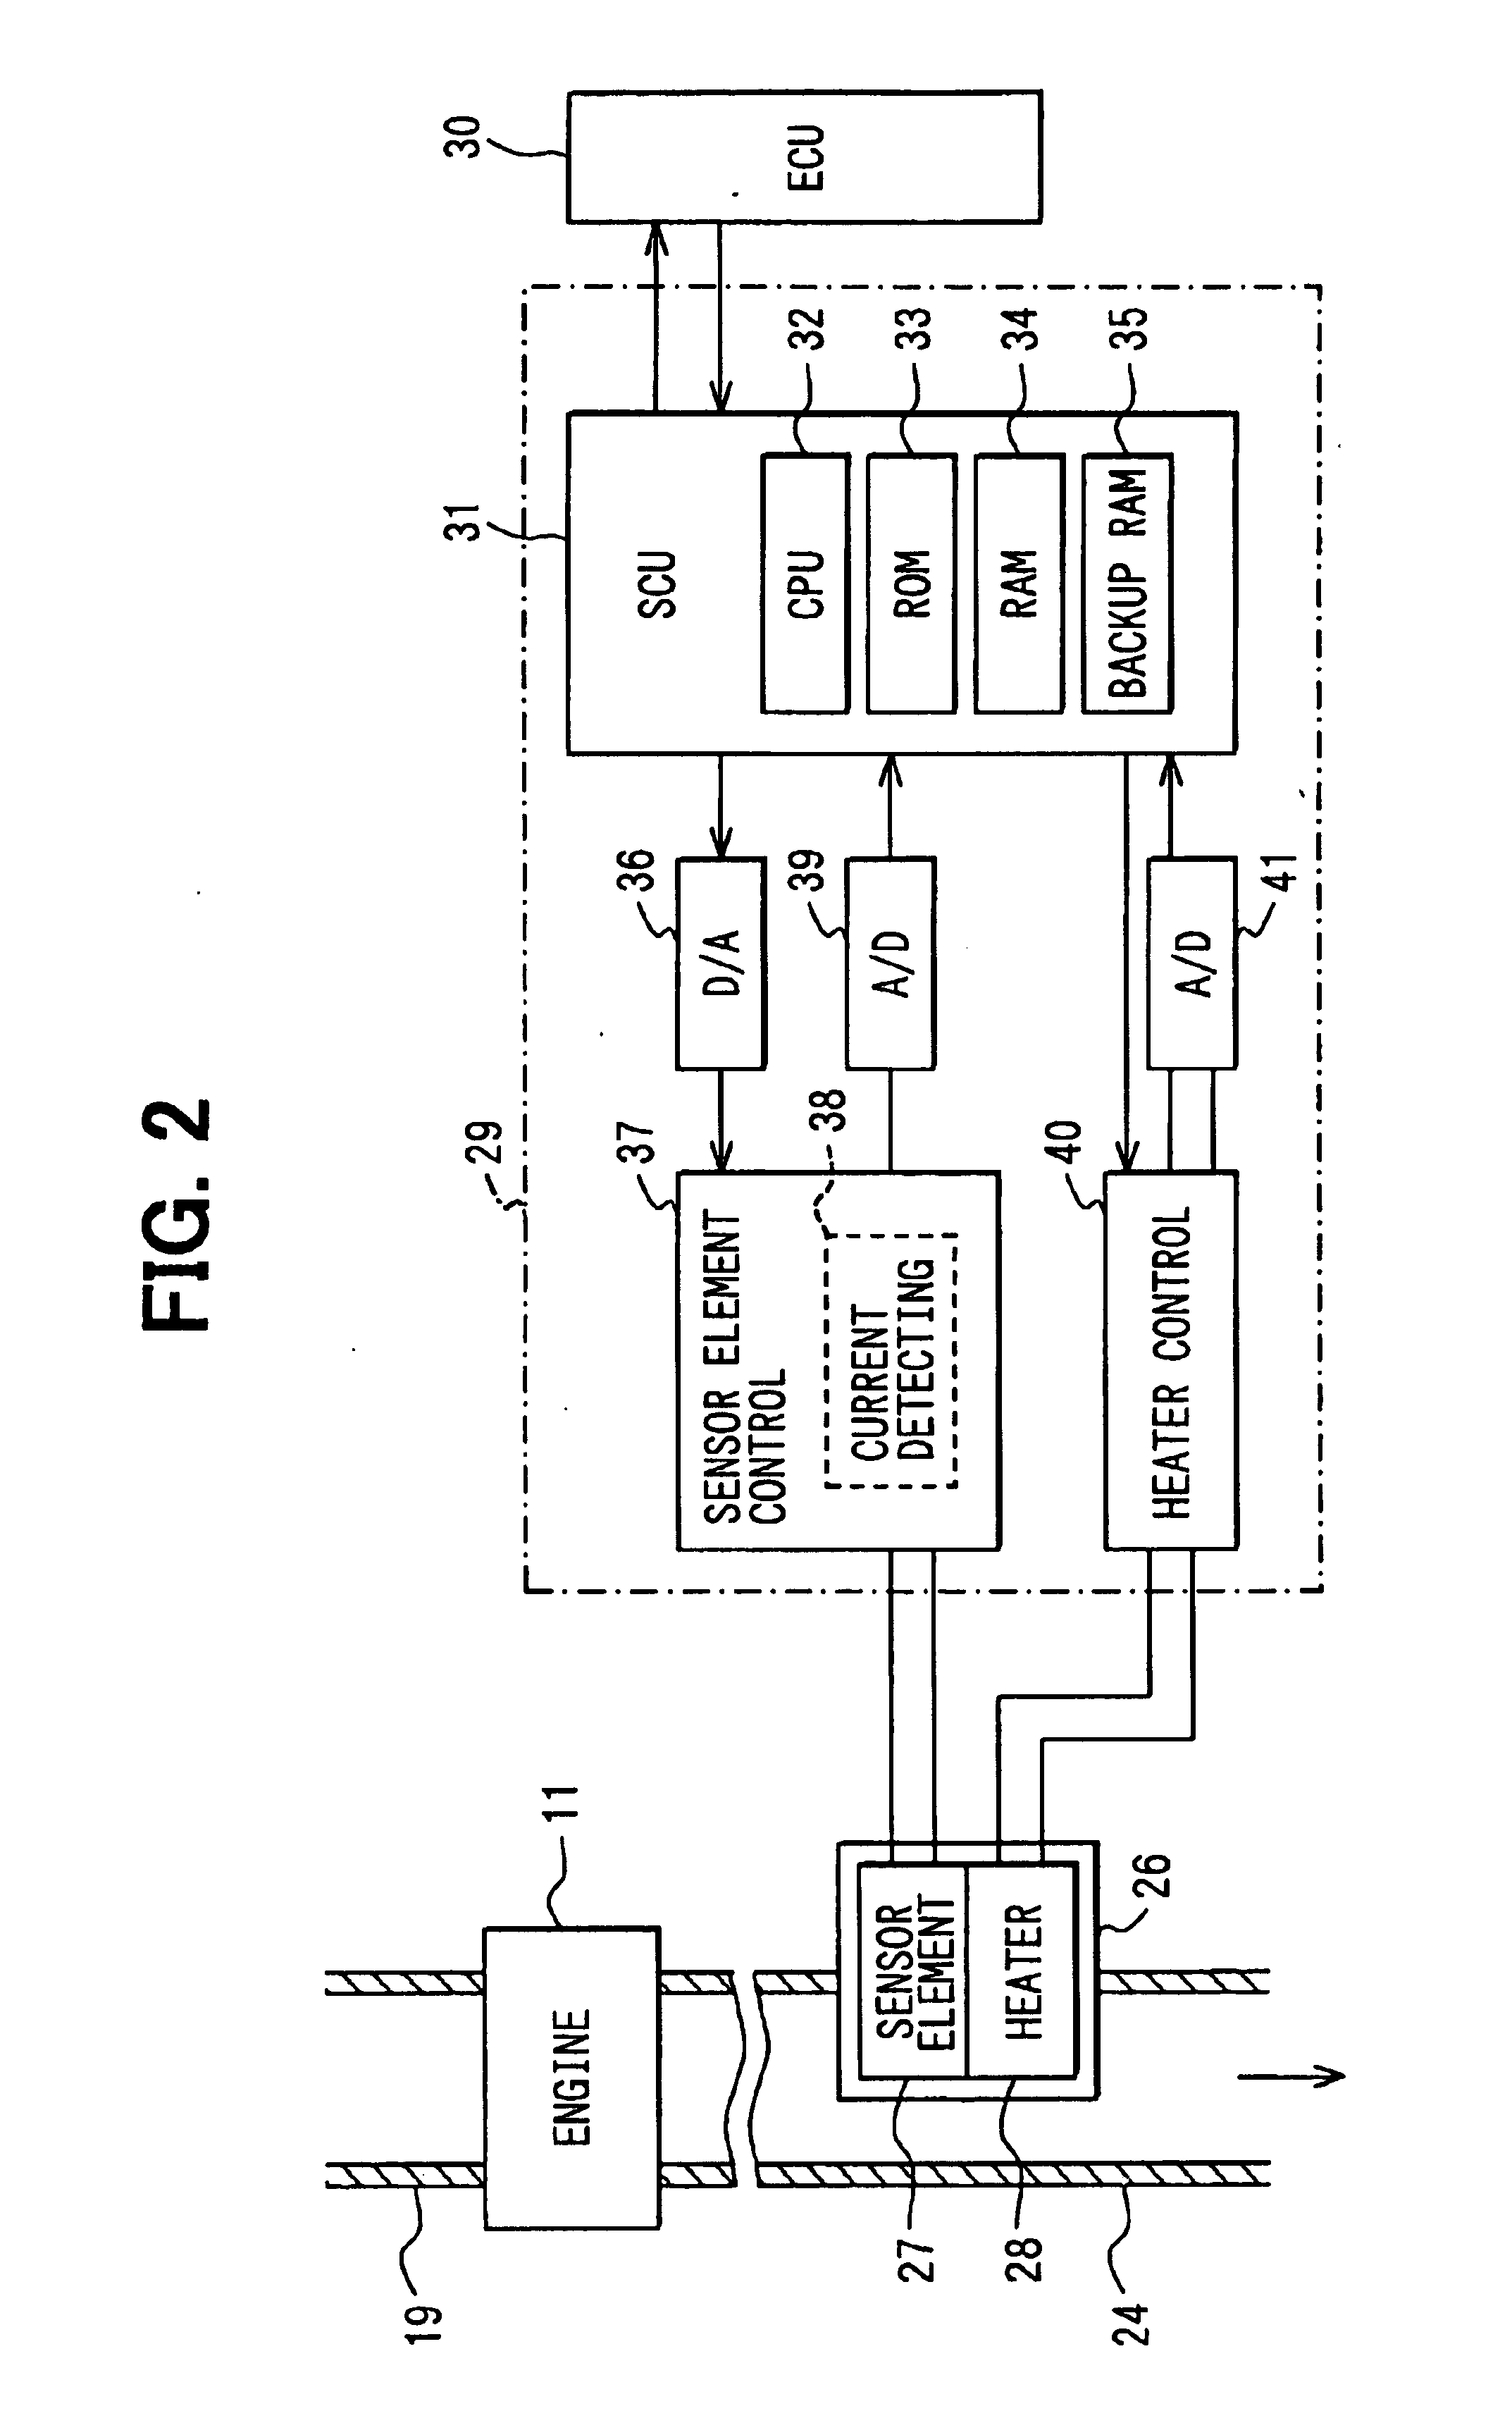 Emission control system with catalyst warm-up speeding control